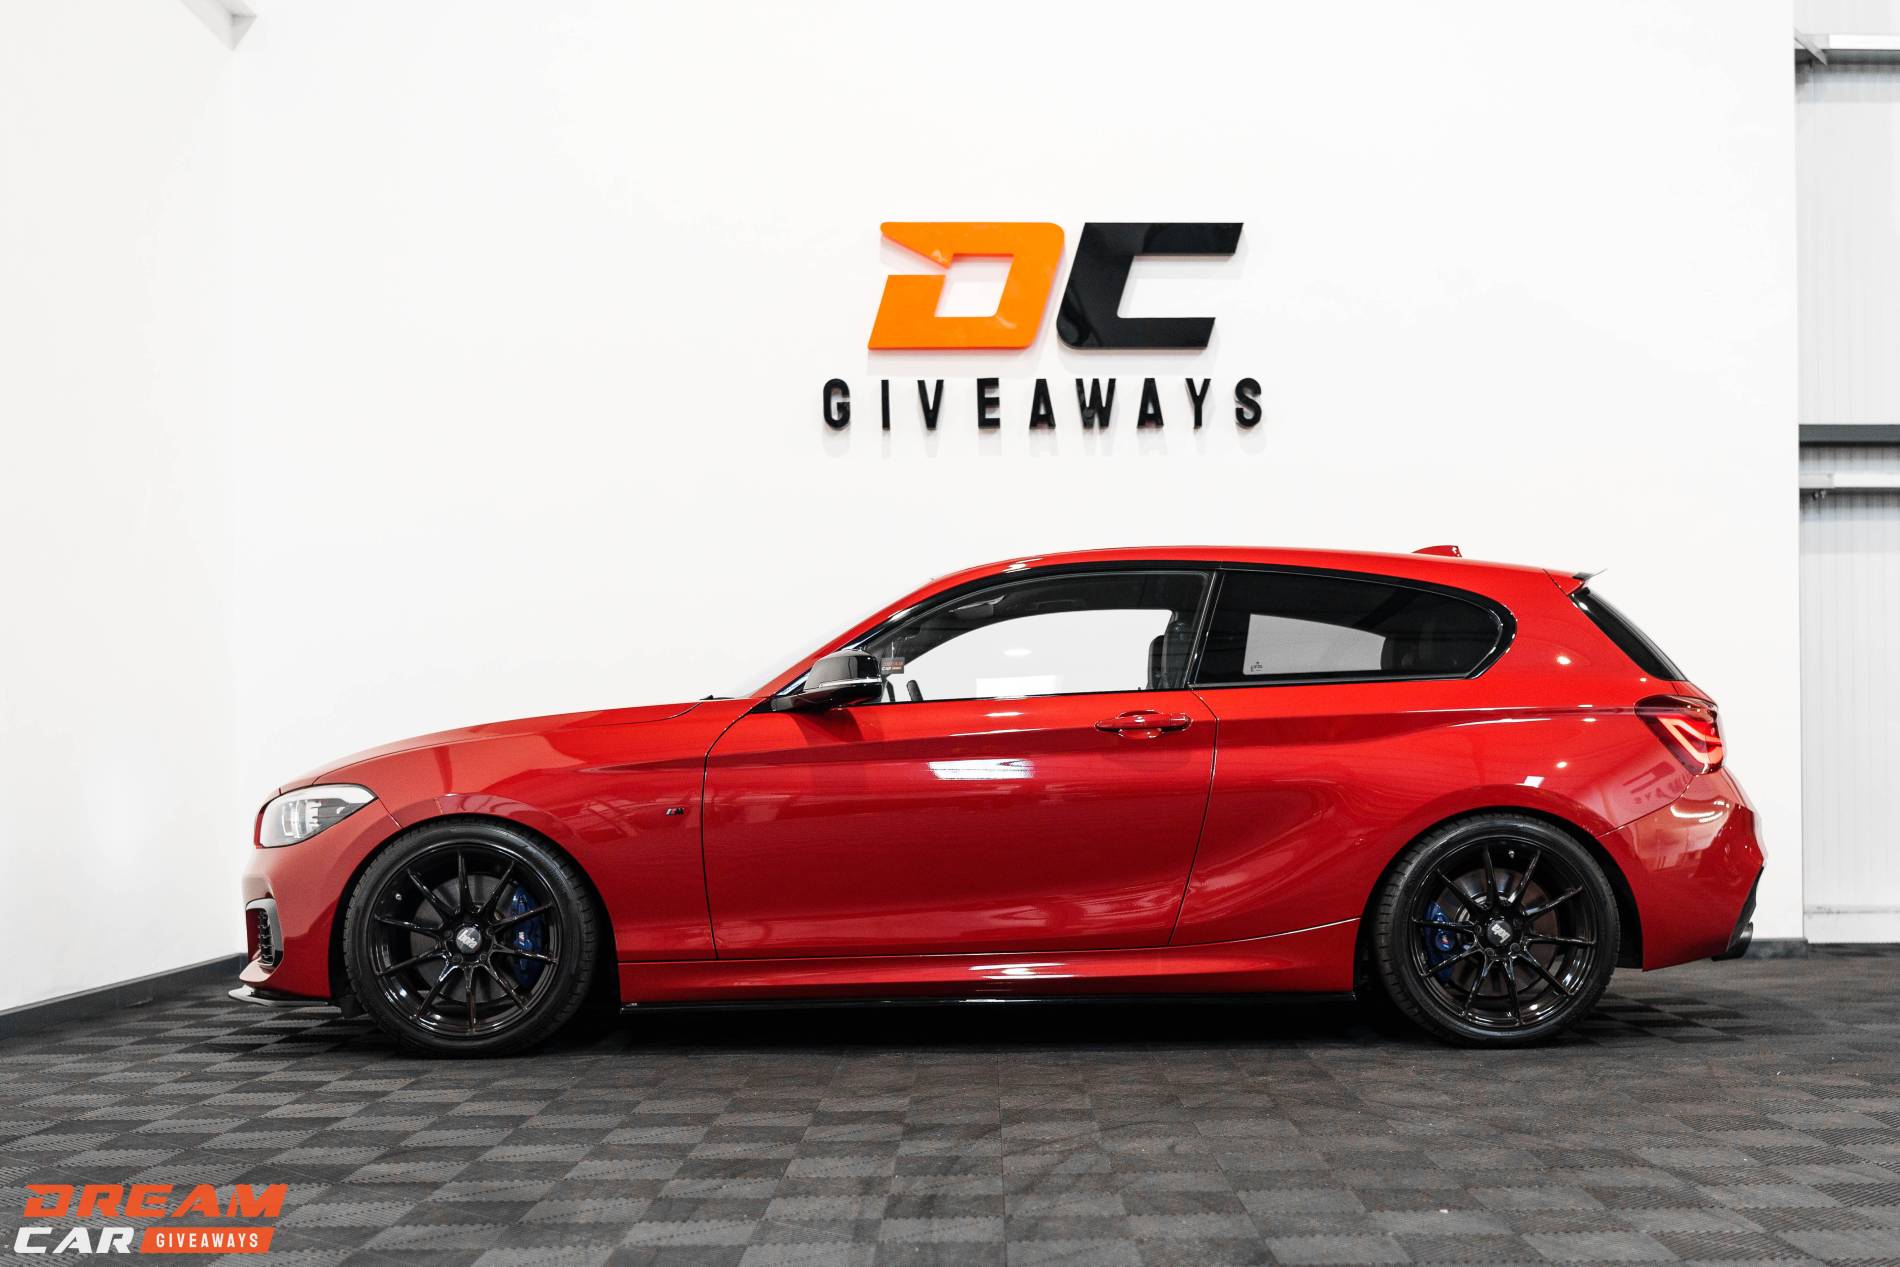 Win this 550HP BMW M140 & £1,000 or £20,000 Tax Free